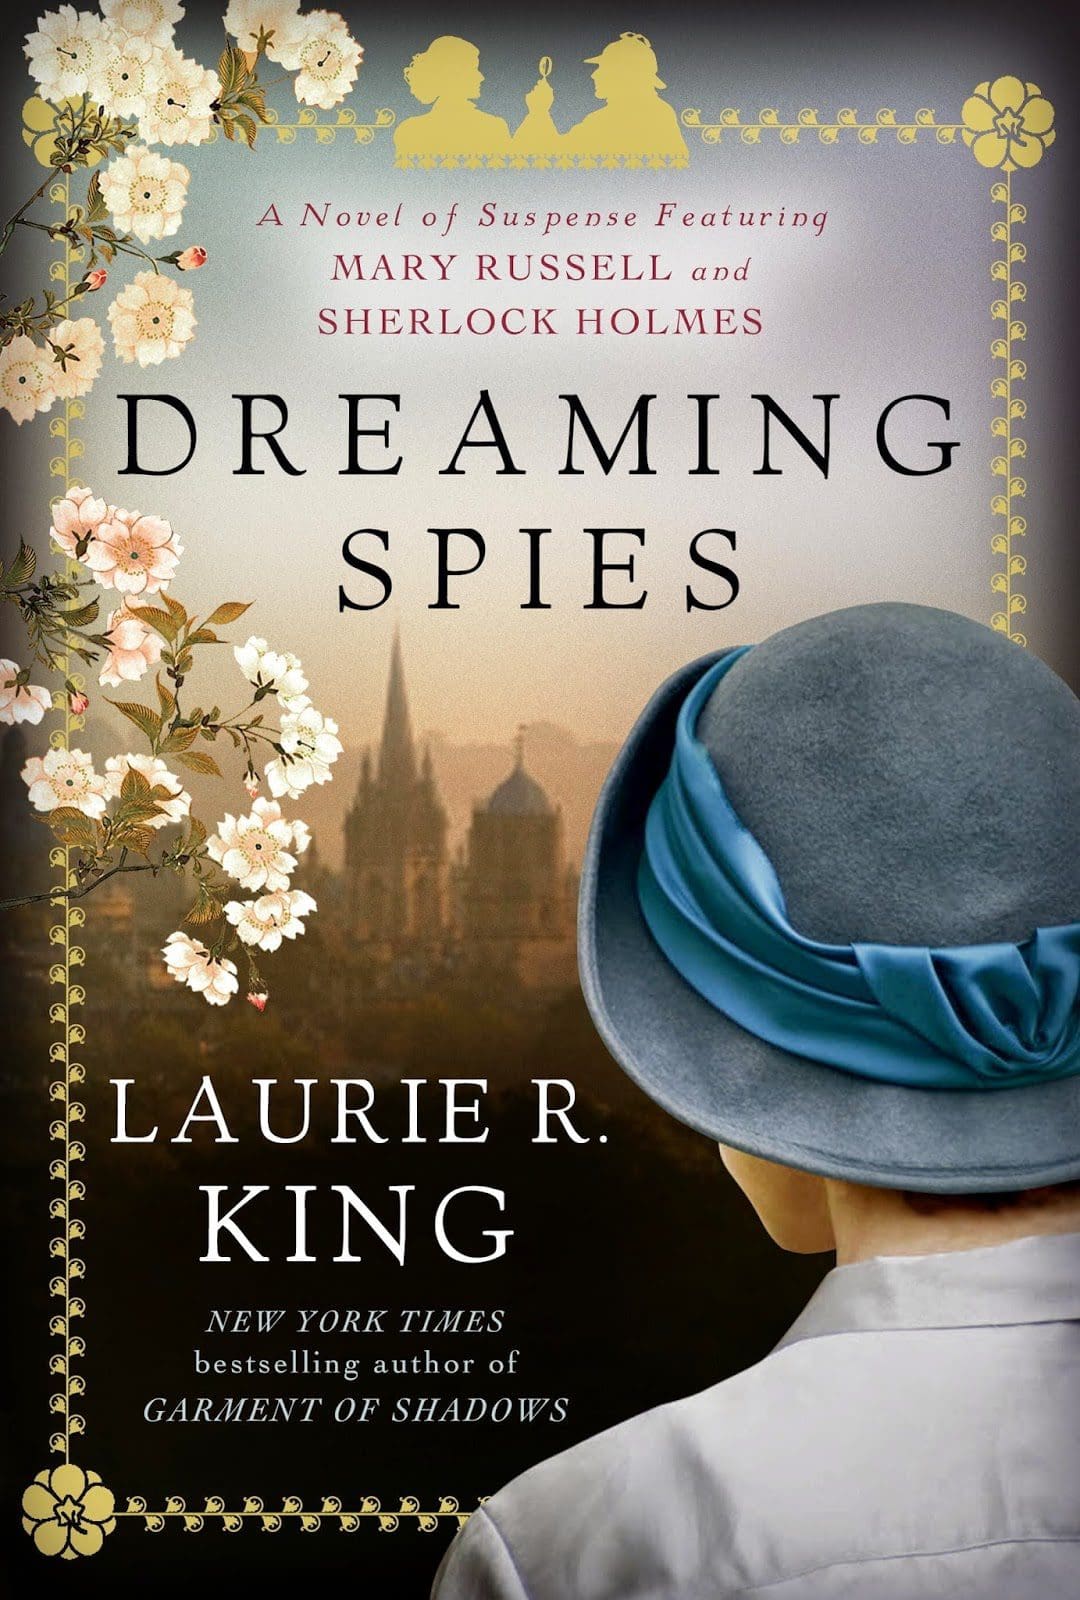 Dreaming-Spies-High-Res-JPEG